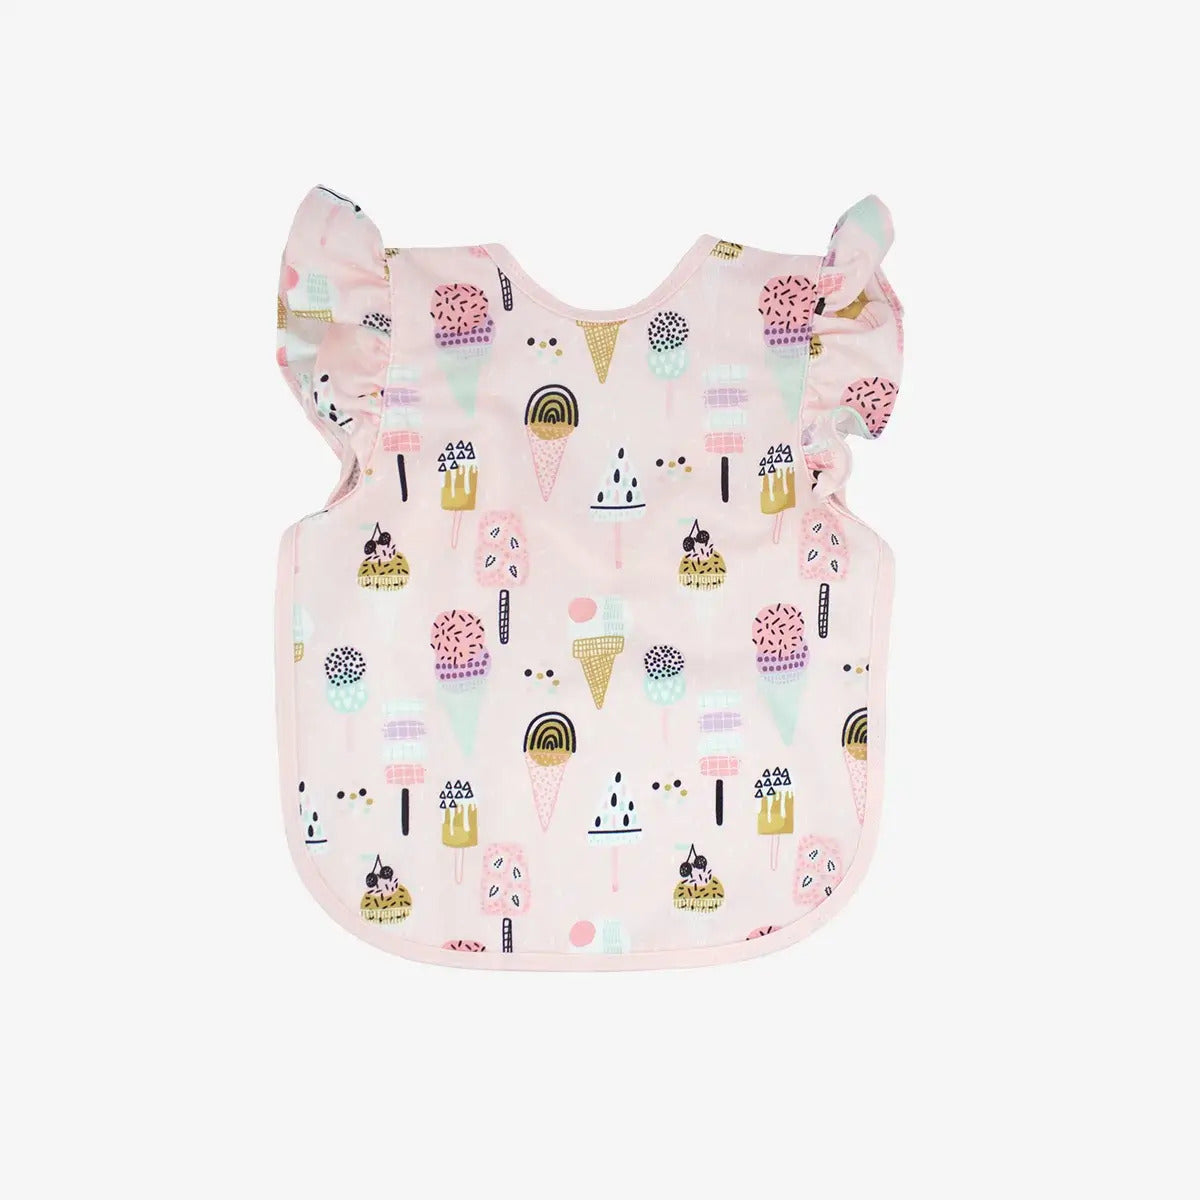 BapronBaby® Bapron in Ice Cream Flutter / Bib + Apron That Safely Ties Around the Body